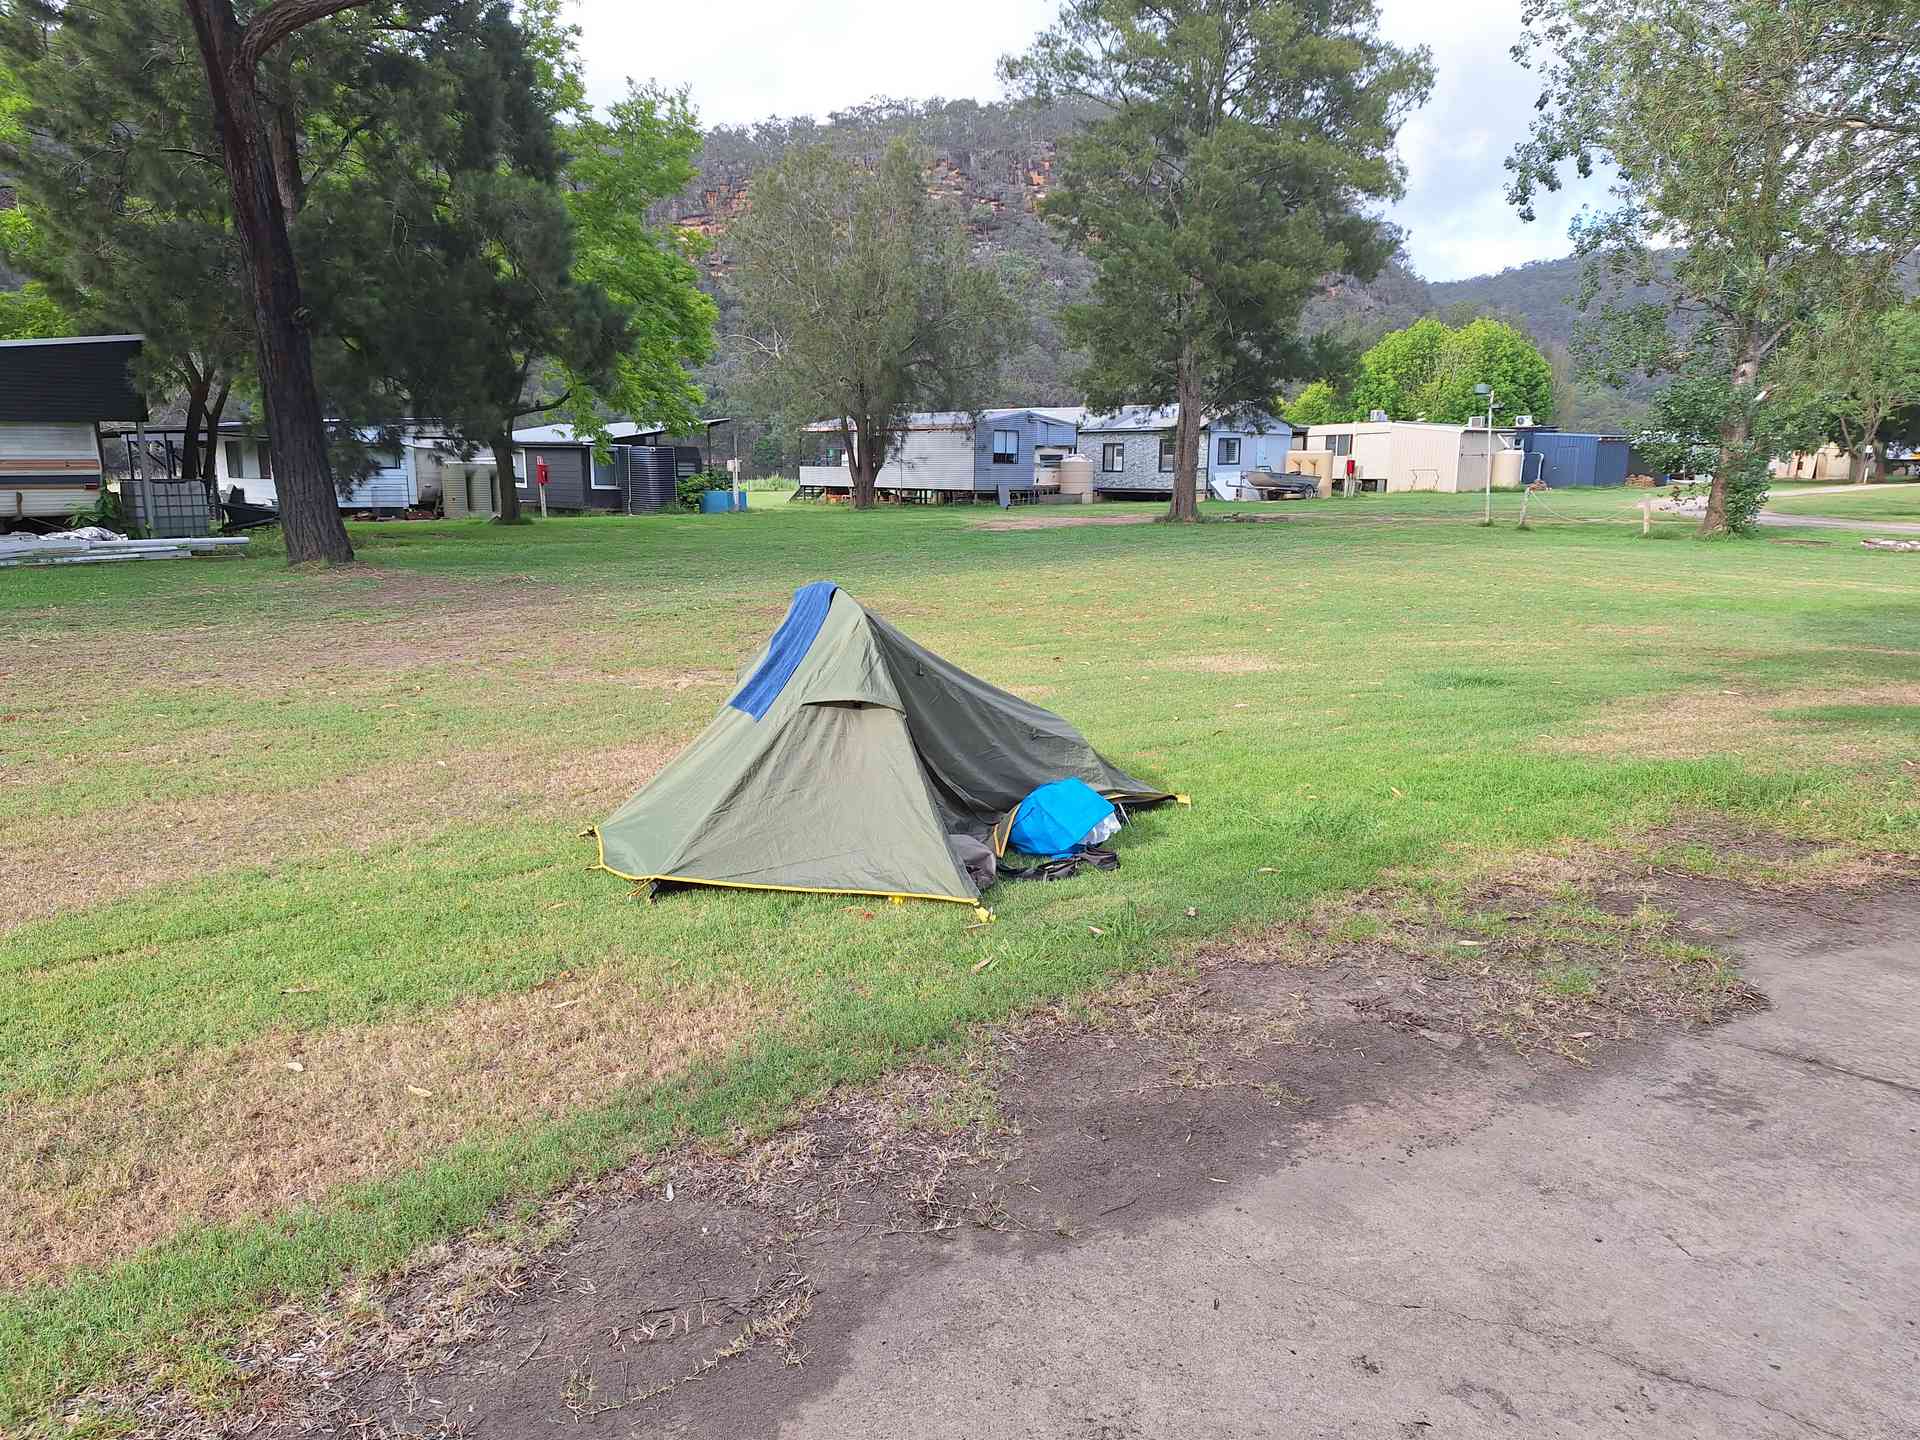 Day 1 ended at the Rosdale Caravan park about 3kms downstream from Wiseman's ferry.